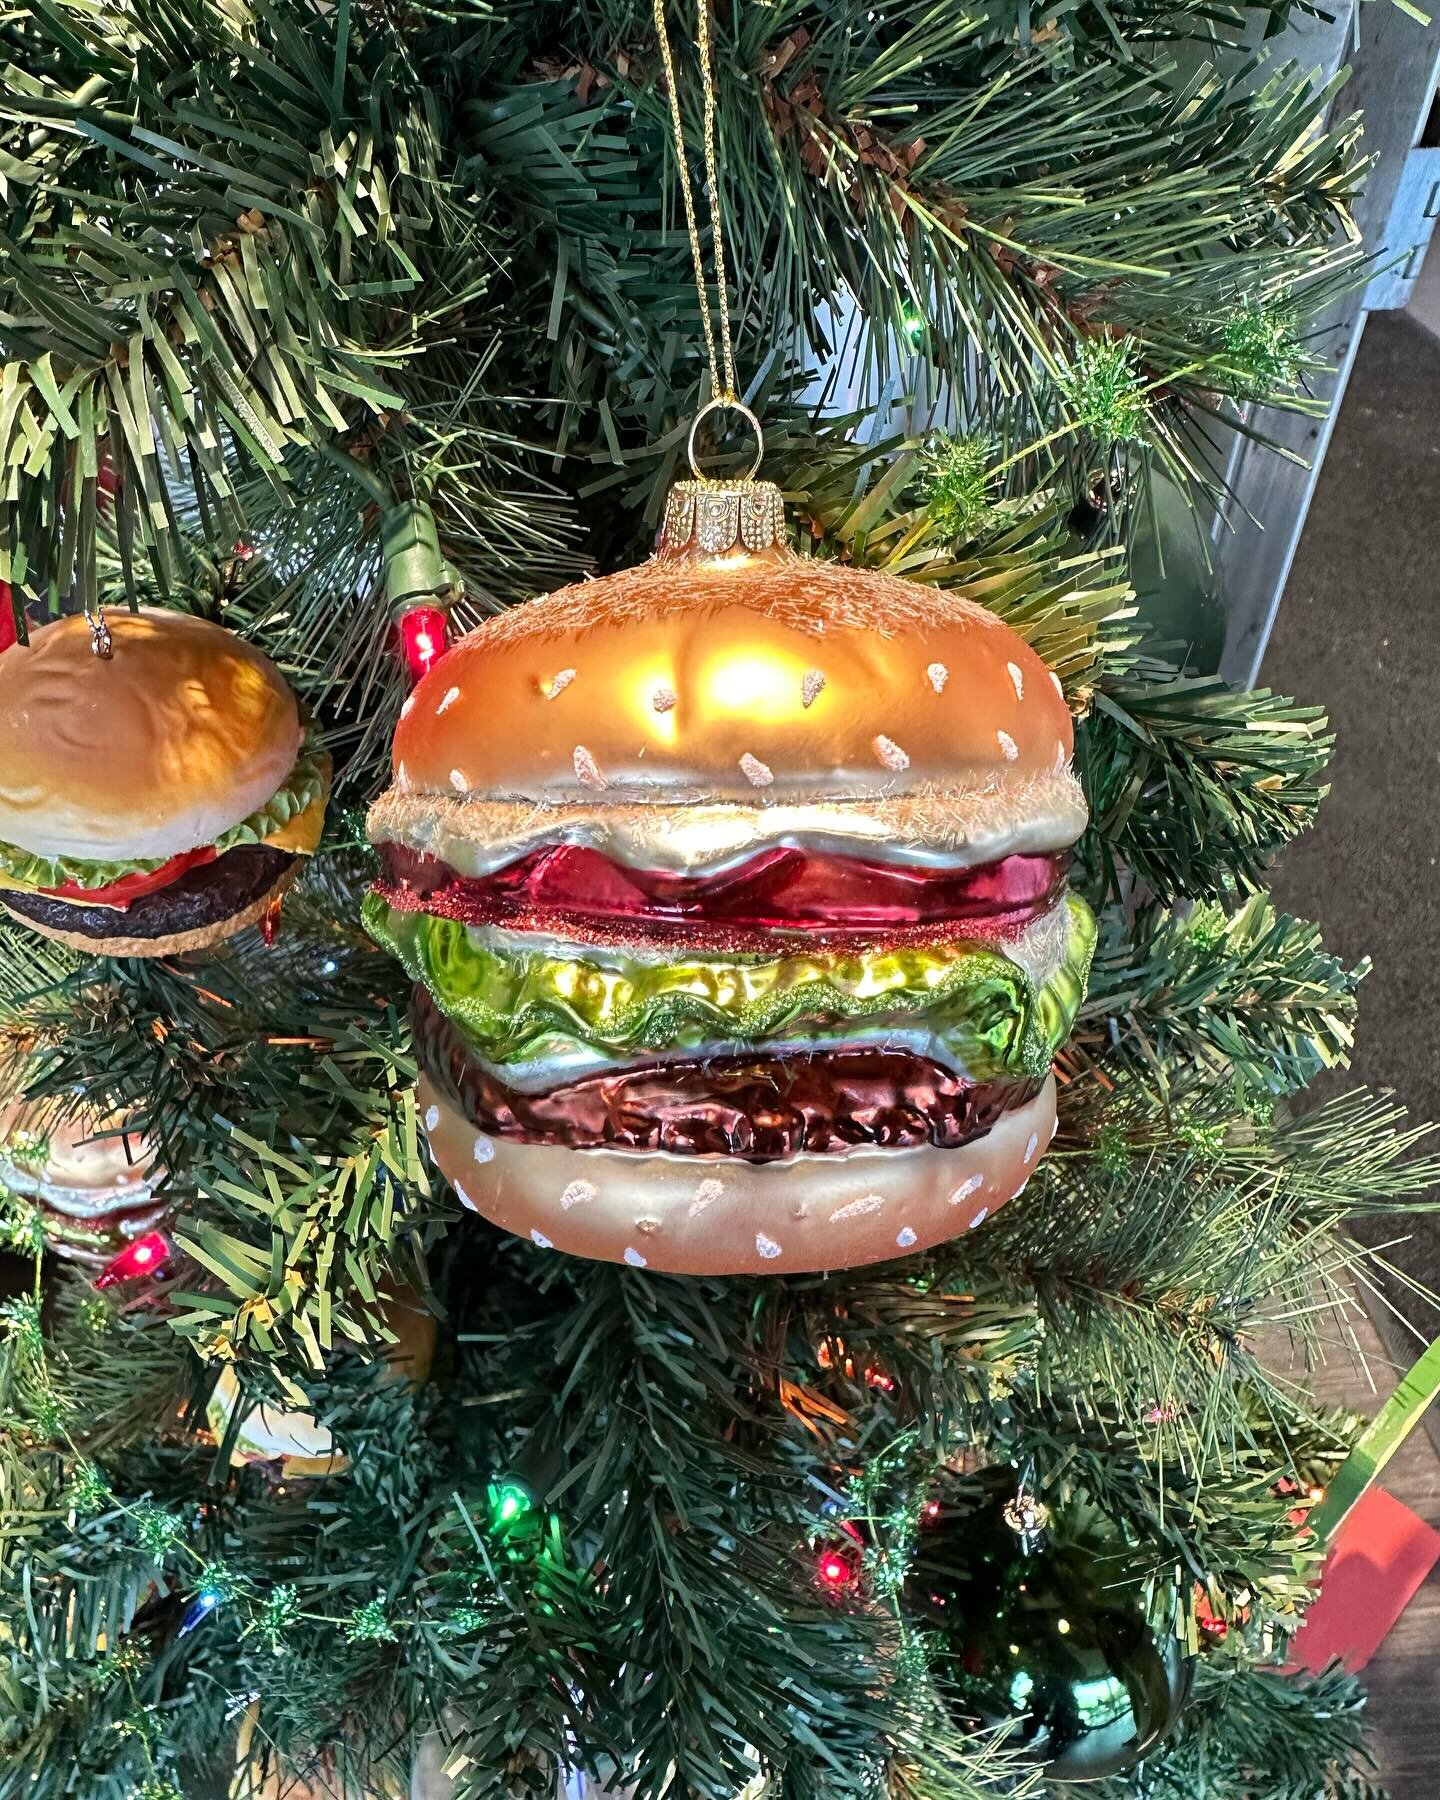 Merry Christmas to all!

From the little Christmas tree at Ace No. 3 
@aceno.3 

#mikeeatsnycburgers